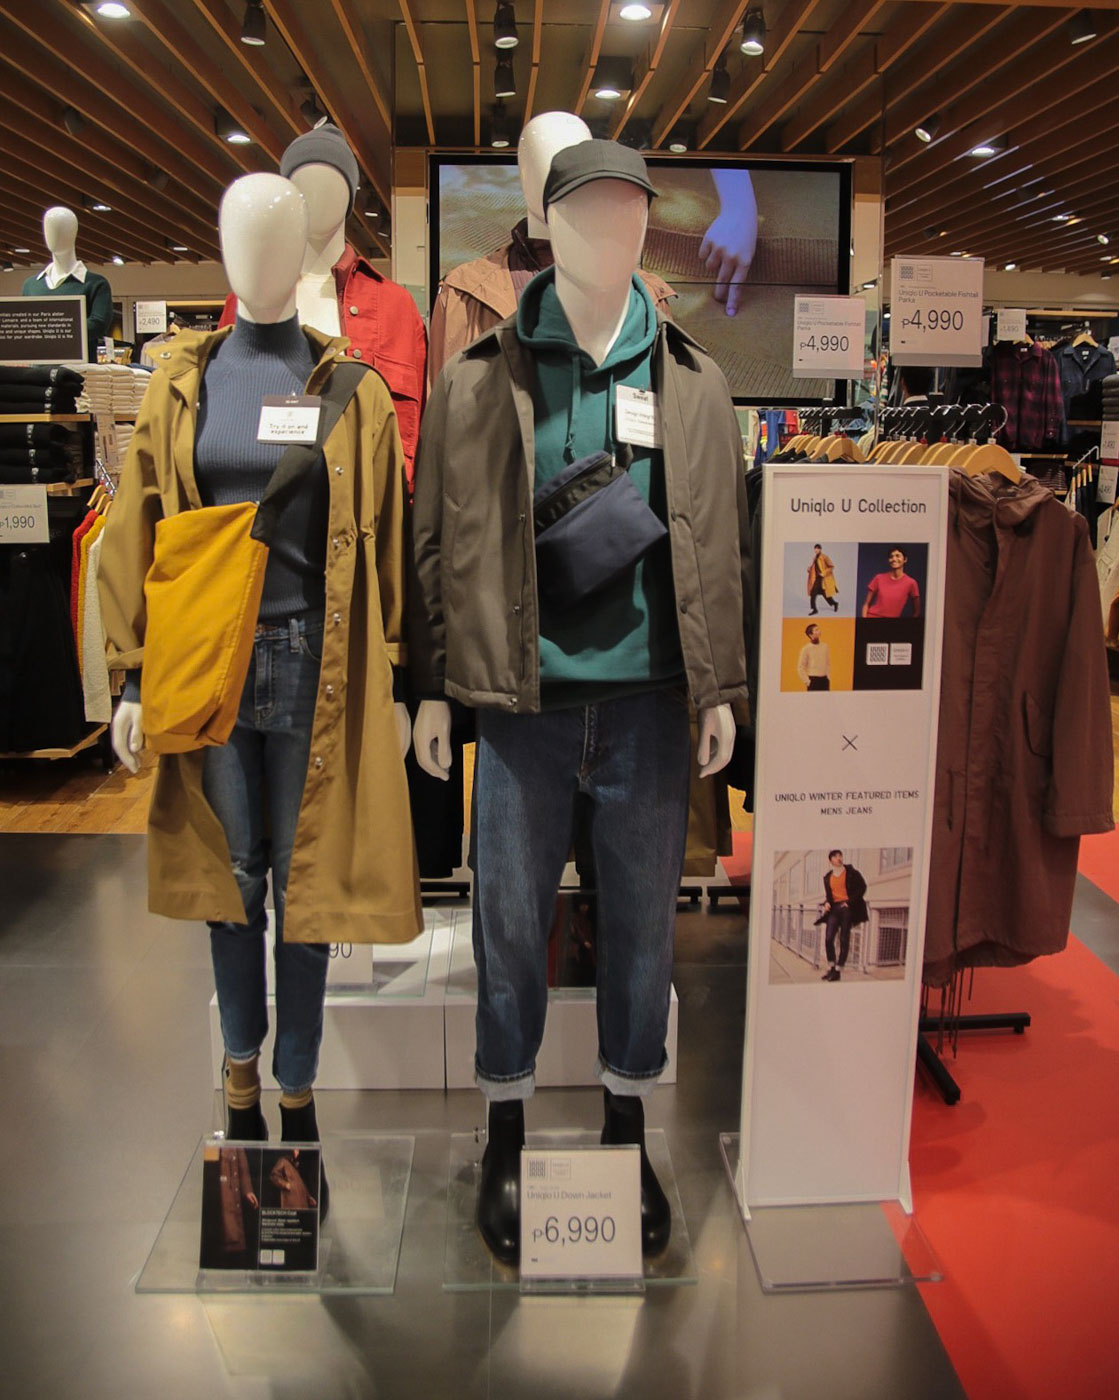 IN PHOTOS: The Uniqlo global flagship store at Glorietta 5